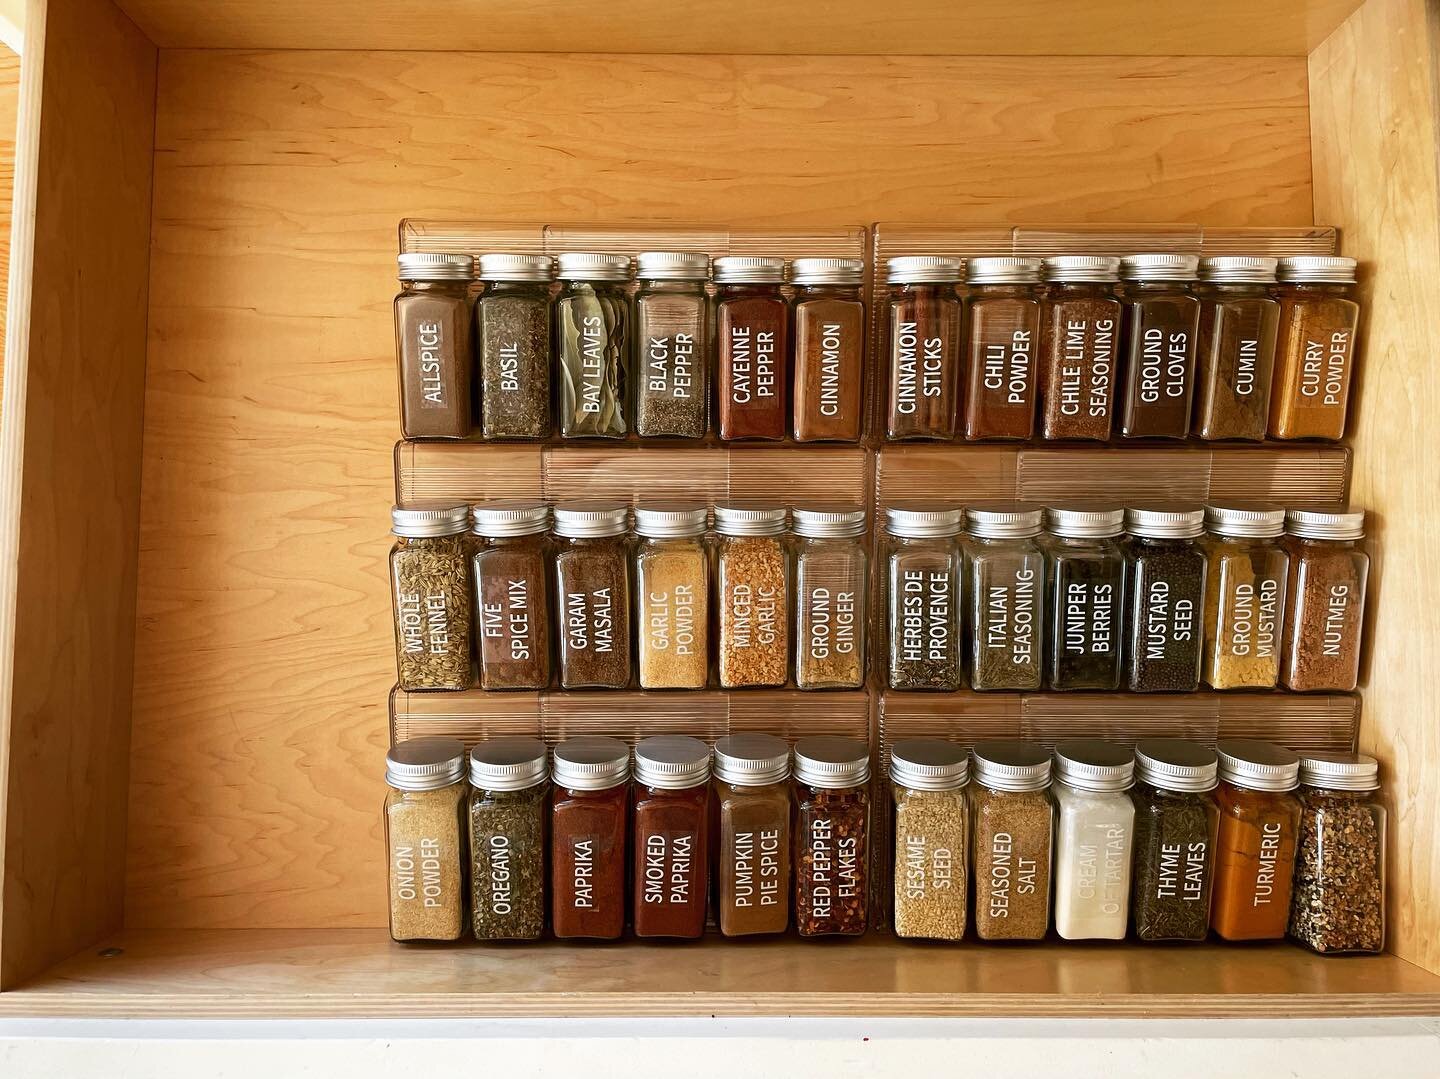 And if you&rsquo;re wondering where the spices in the previous post went, we emptied the dreaded junk drawer to give them a space of the their own&hellip; with some to spare!